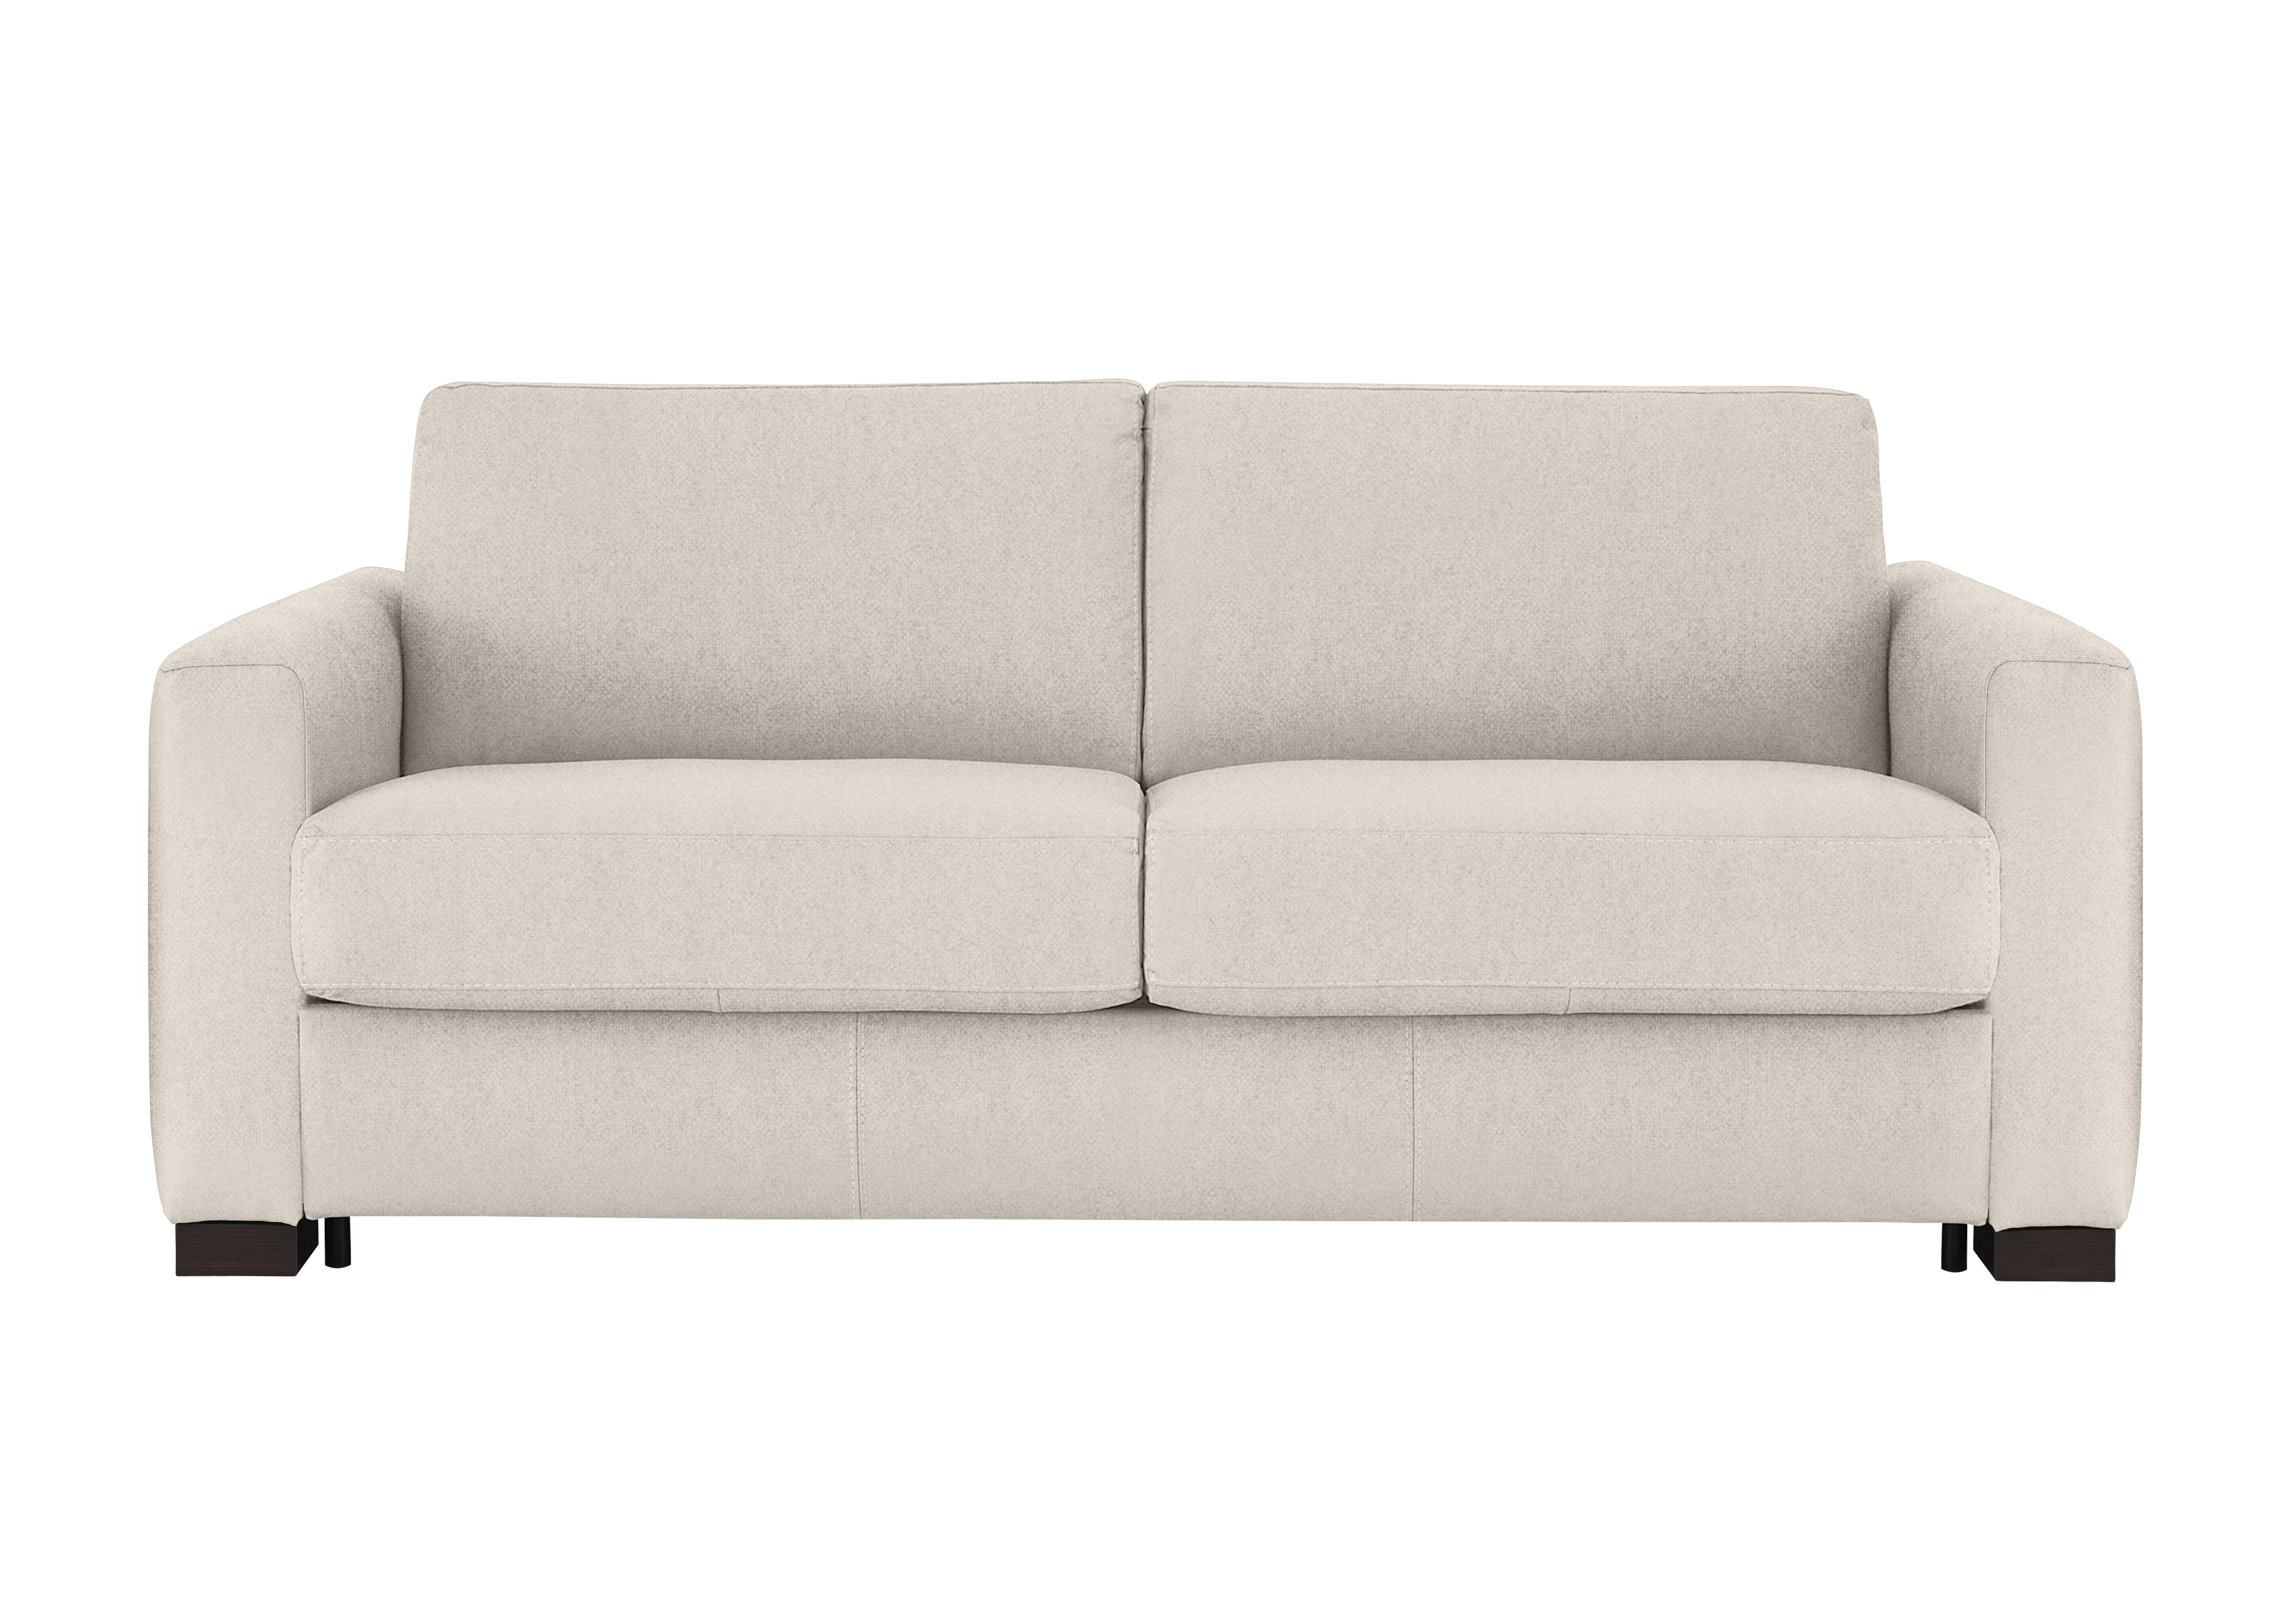 Alcova 3 Seater Fabric Sofa Bed with Box Arms in Fuente Beige on Furniture Village